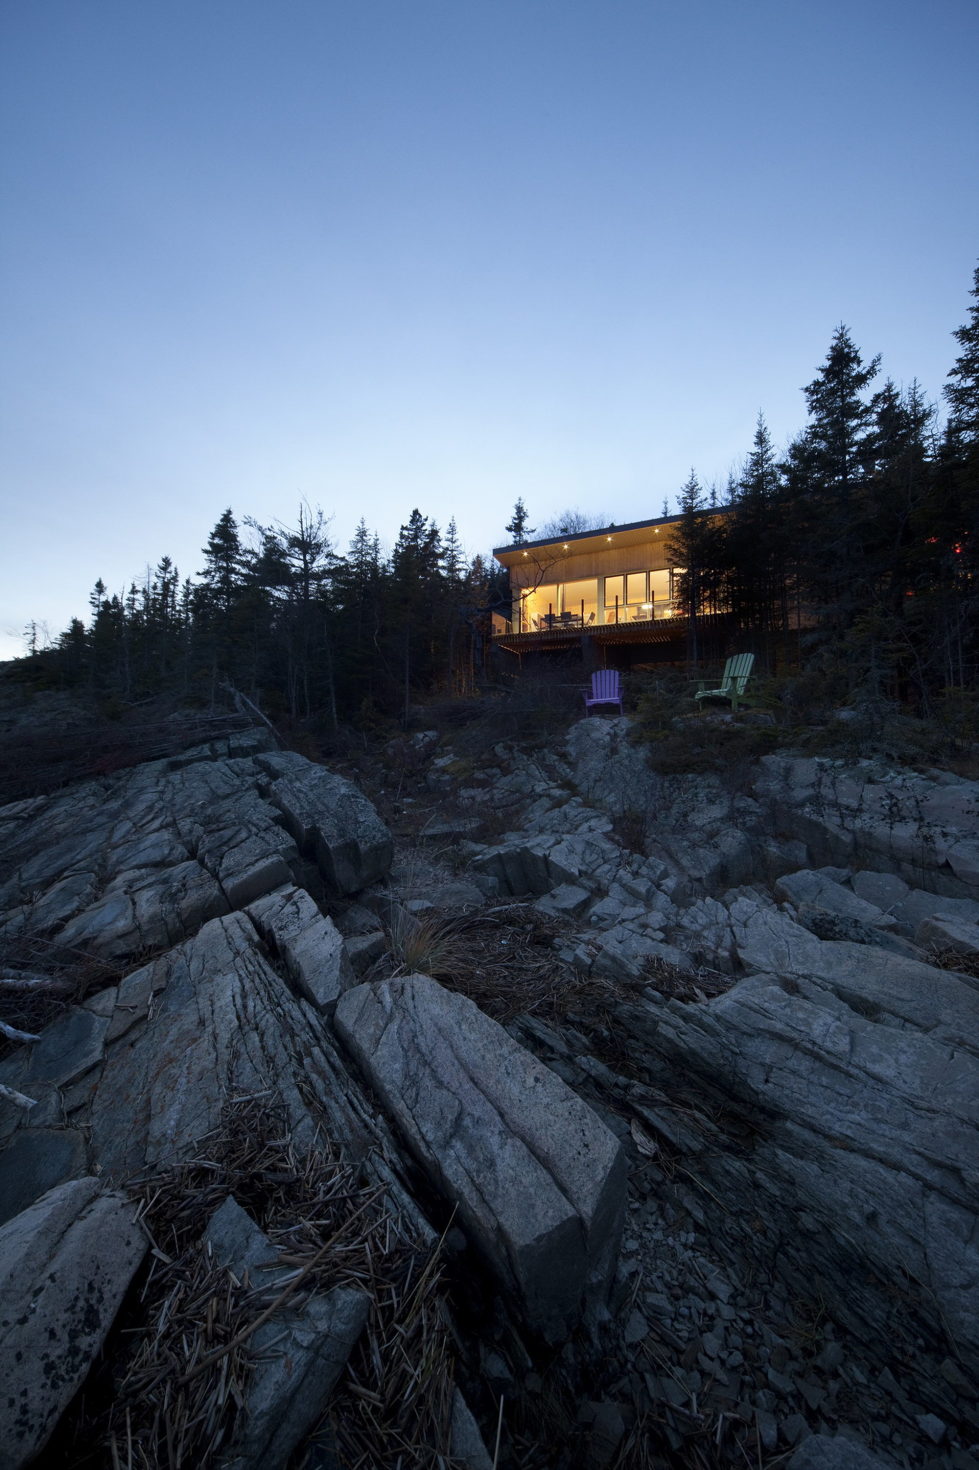 Panorama The Chalet On The Rocks In Saint-Simeon, Canada 8